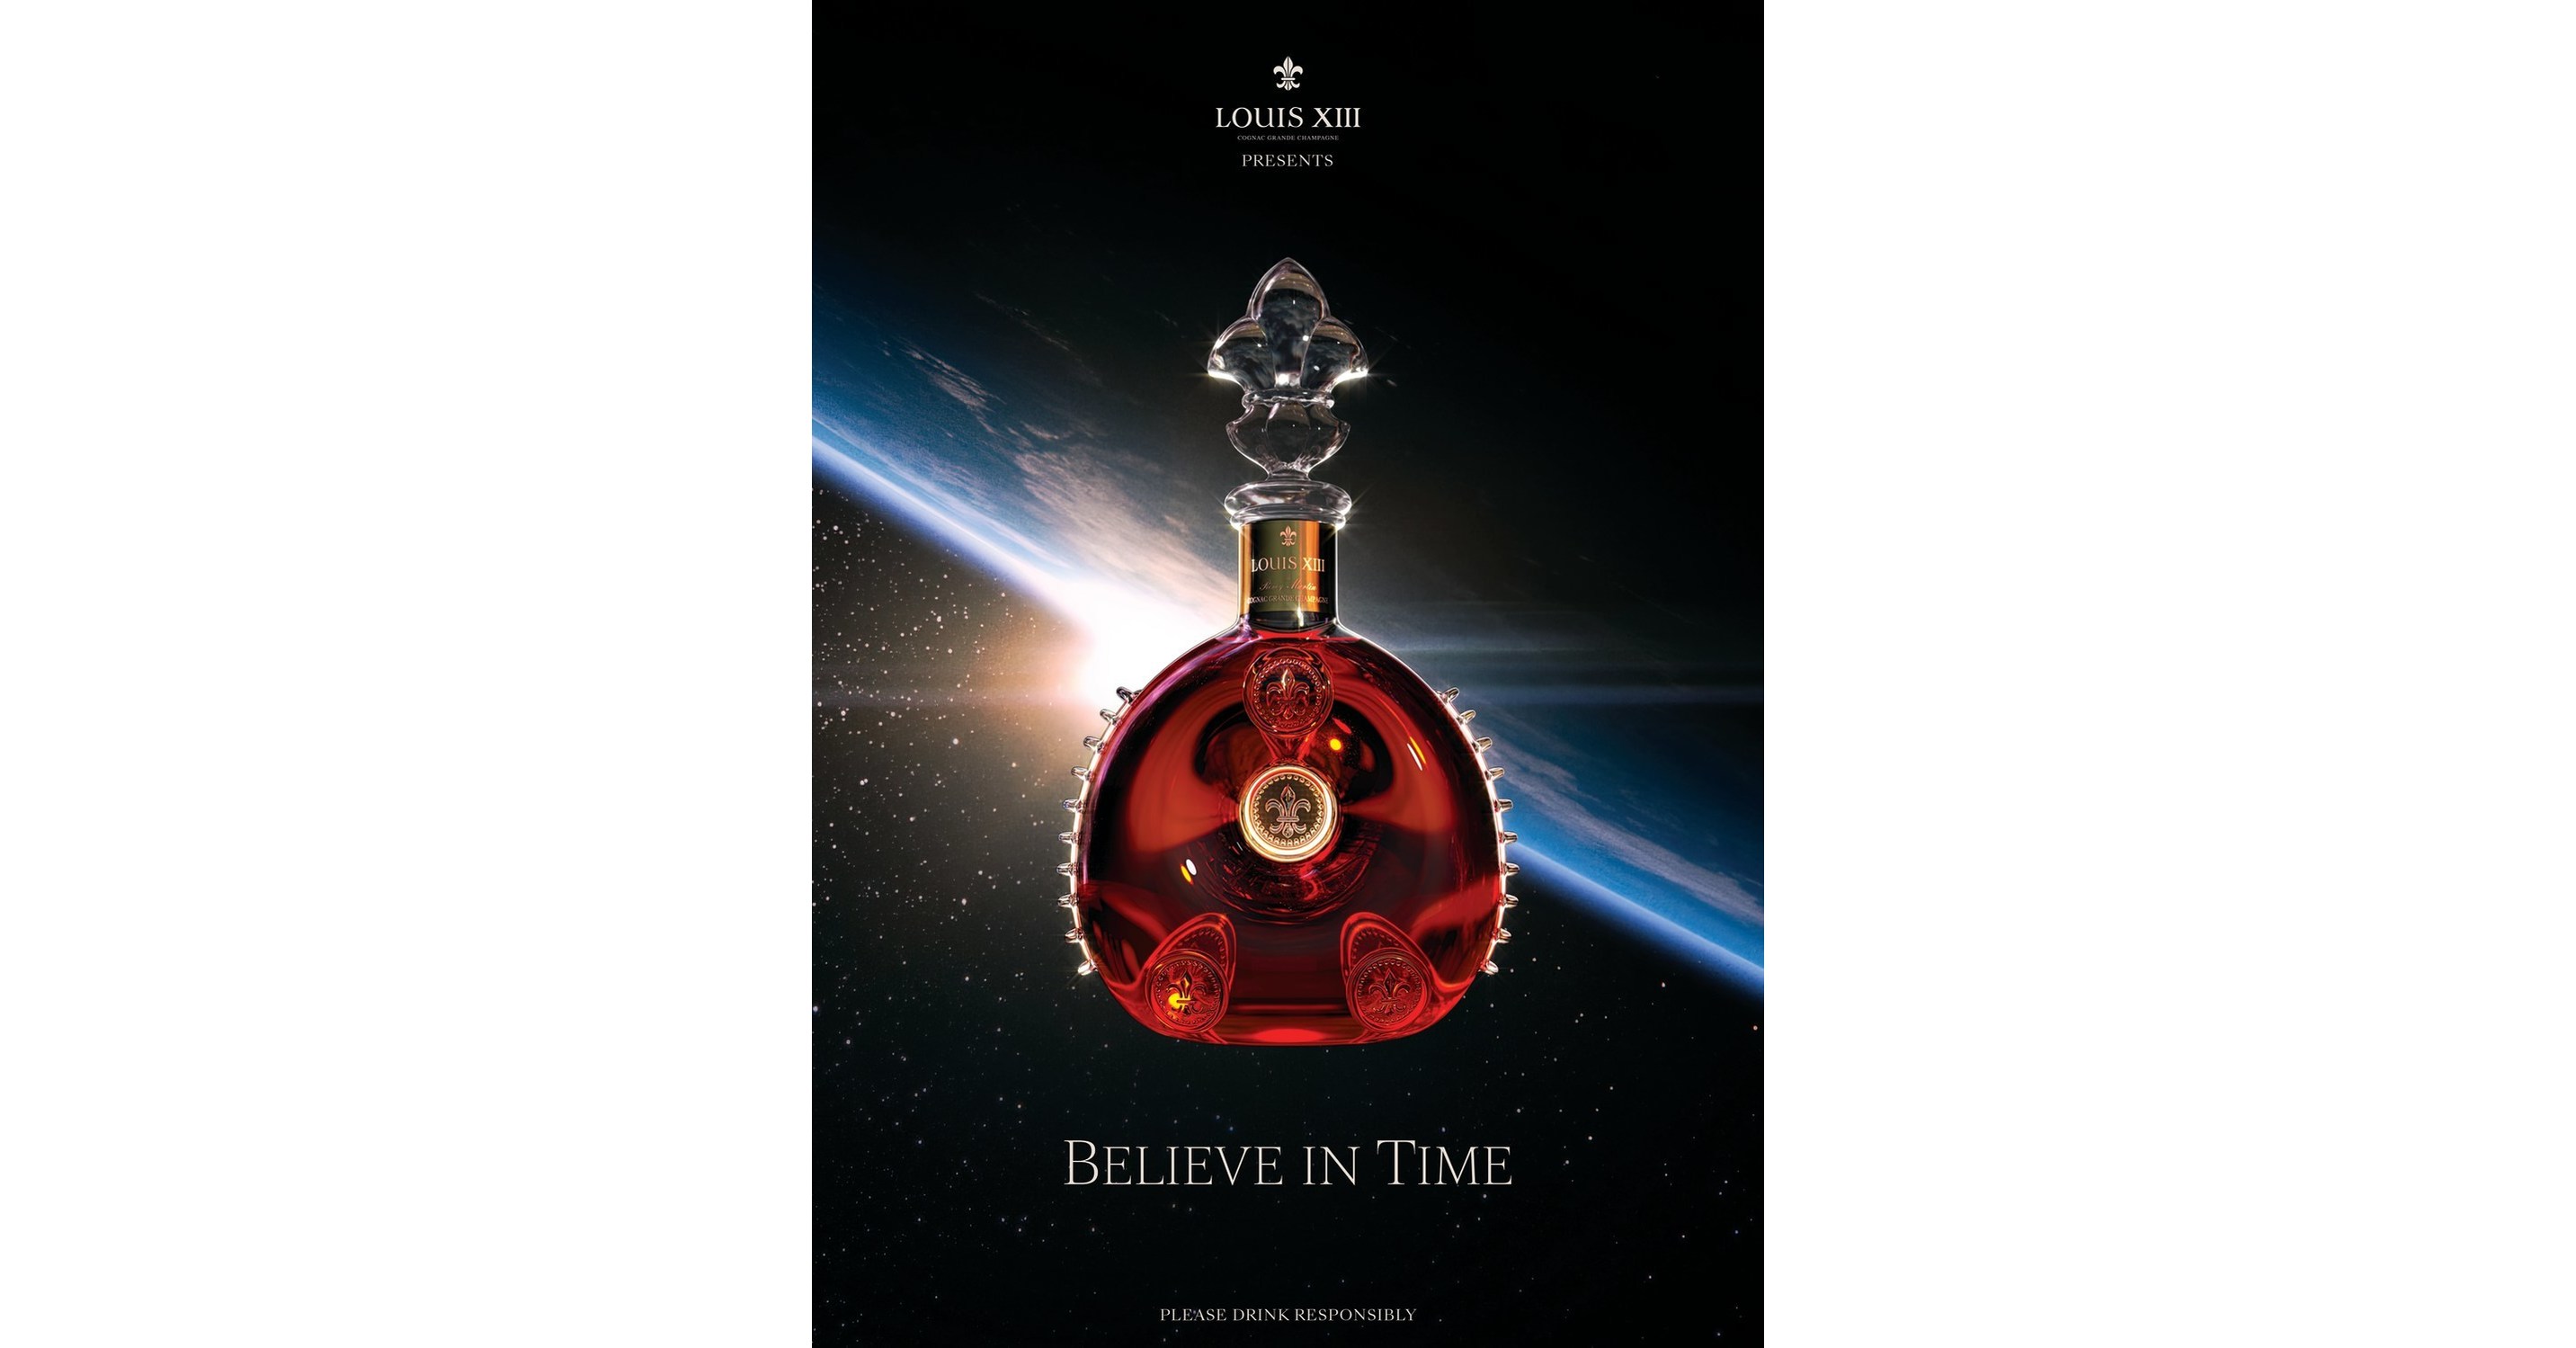 LOUIS XIII COGNAC'S LATEST CAMPAIGN ASKS US TO 'BELIEVE IN TIME' -  Cocktails Distilled